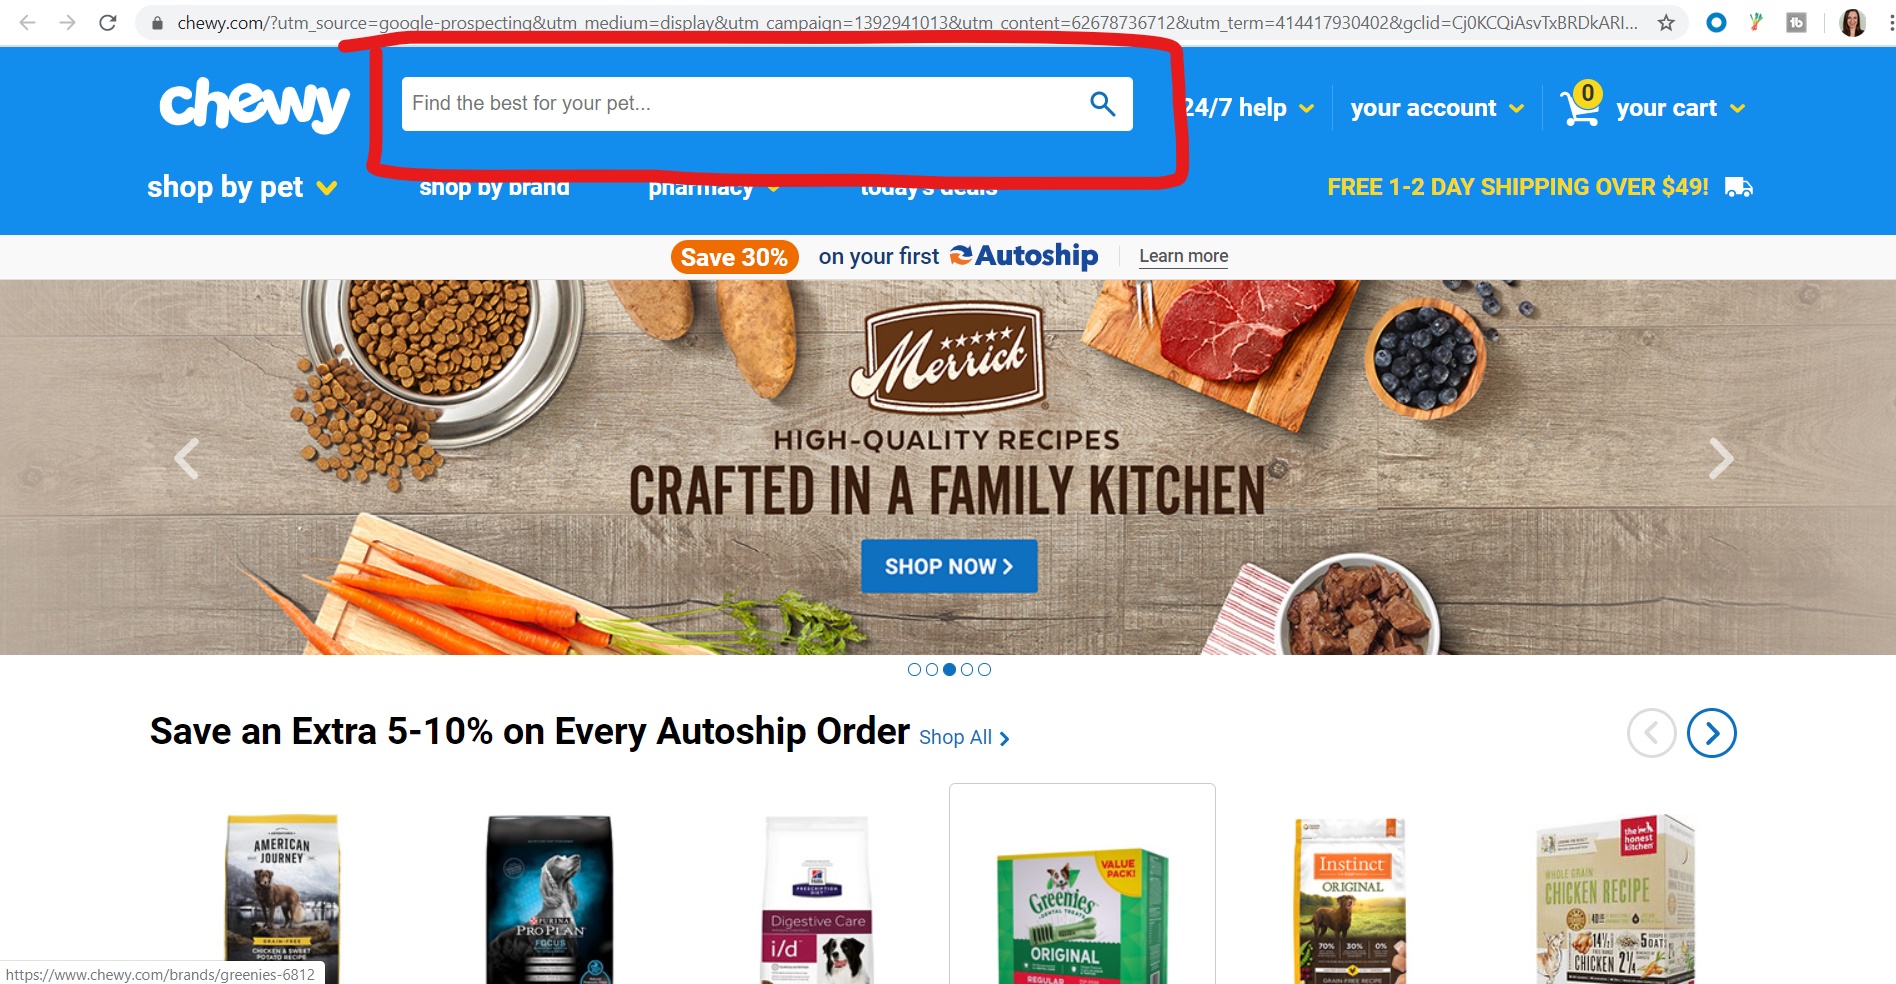 Easy Product Search and Navigation